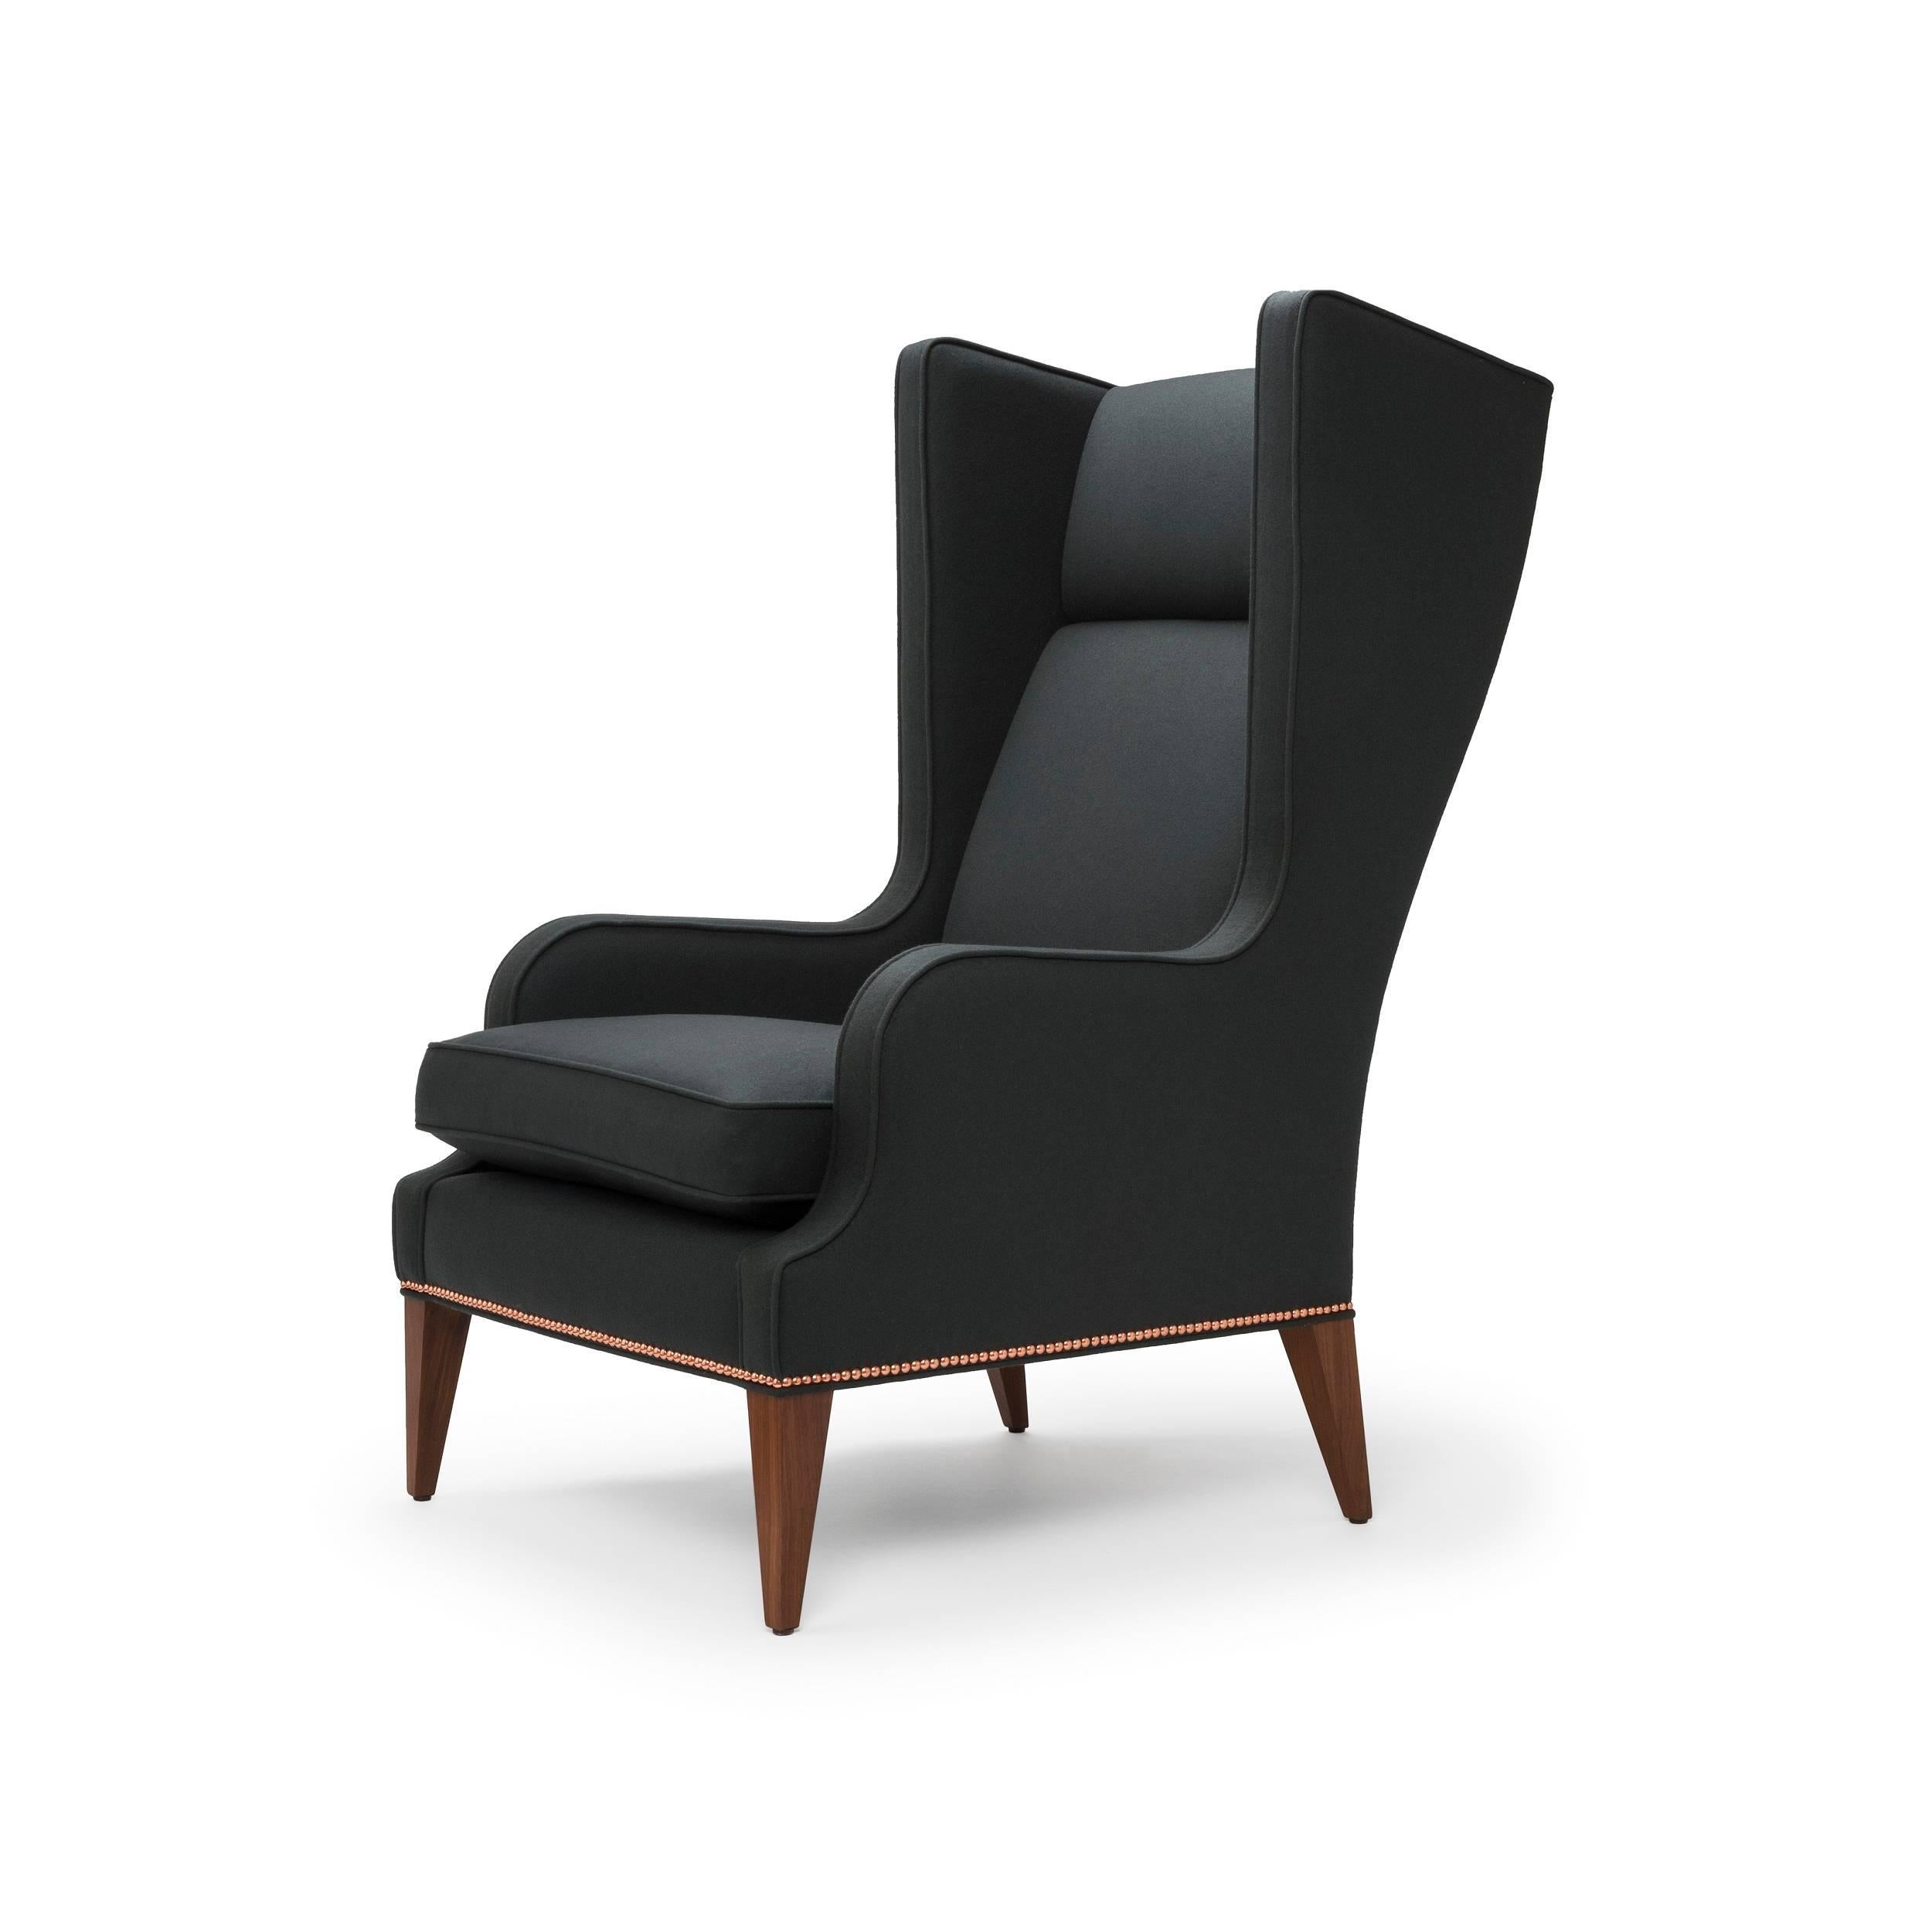 The Alae is available as a Wing or Lounge Chair and features sleek sculptural lines. The seat is softened perfectly with a luxurious feather and down wrapped cushion. The Alae Wing Chair shown here upholstered in Charcoal Melton Wool with legs in